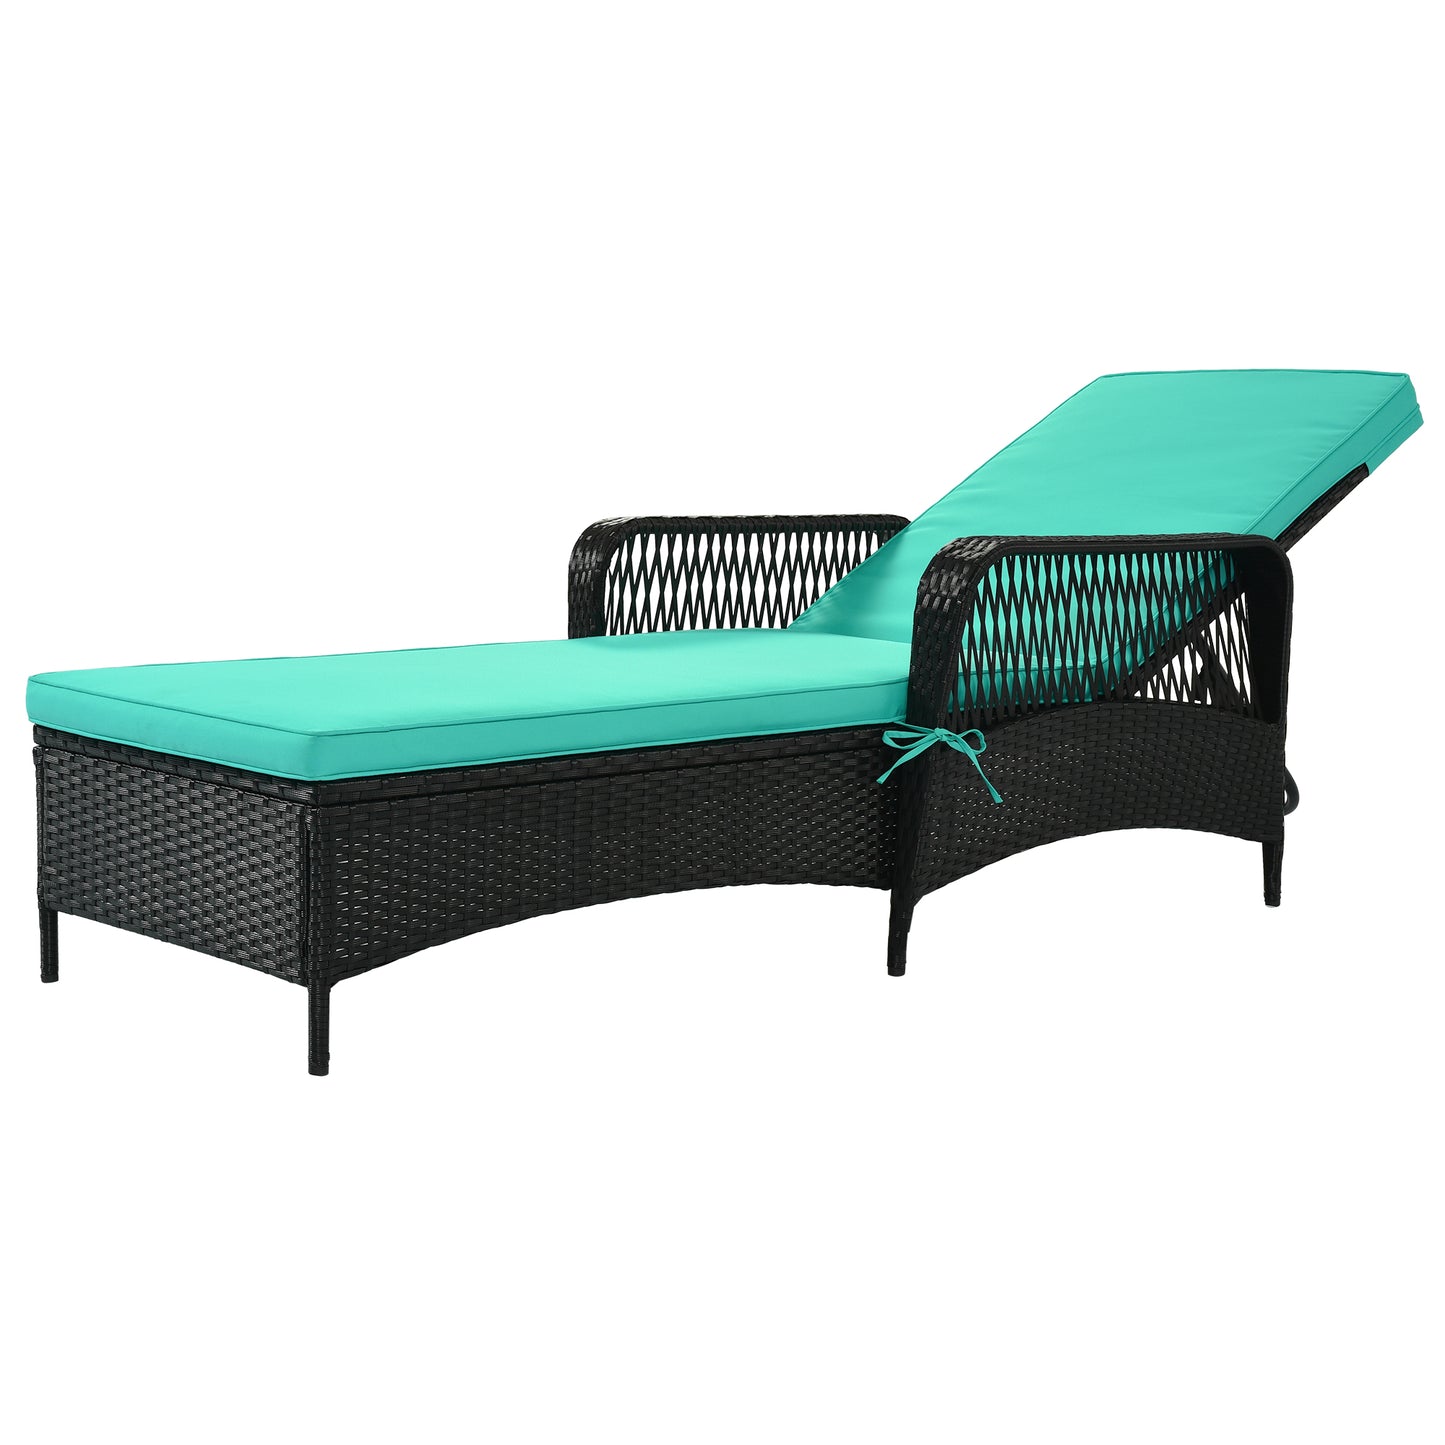 Outdoor PE Rattan Wicker Chaise Lounge, Patio Rattan Reclining Chair Furniture, Beach Pool Adjustable Backrest Recliners with Green Cushions